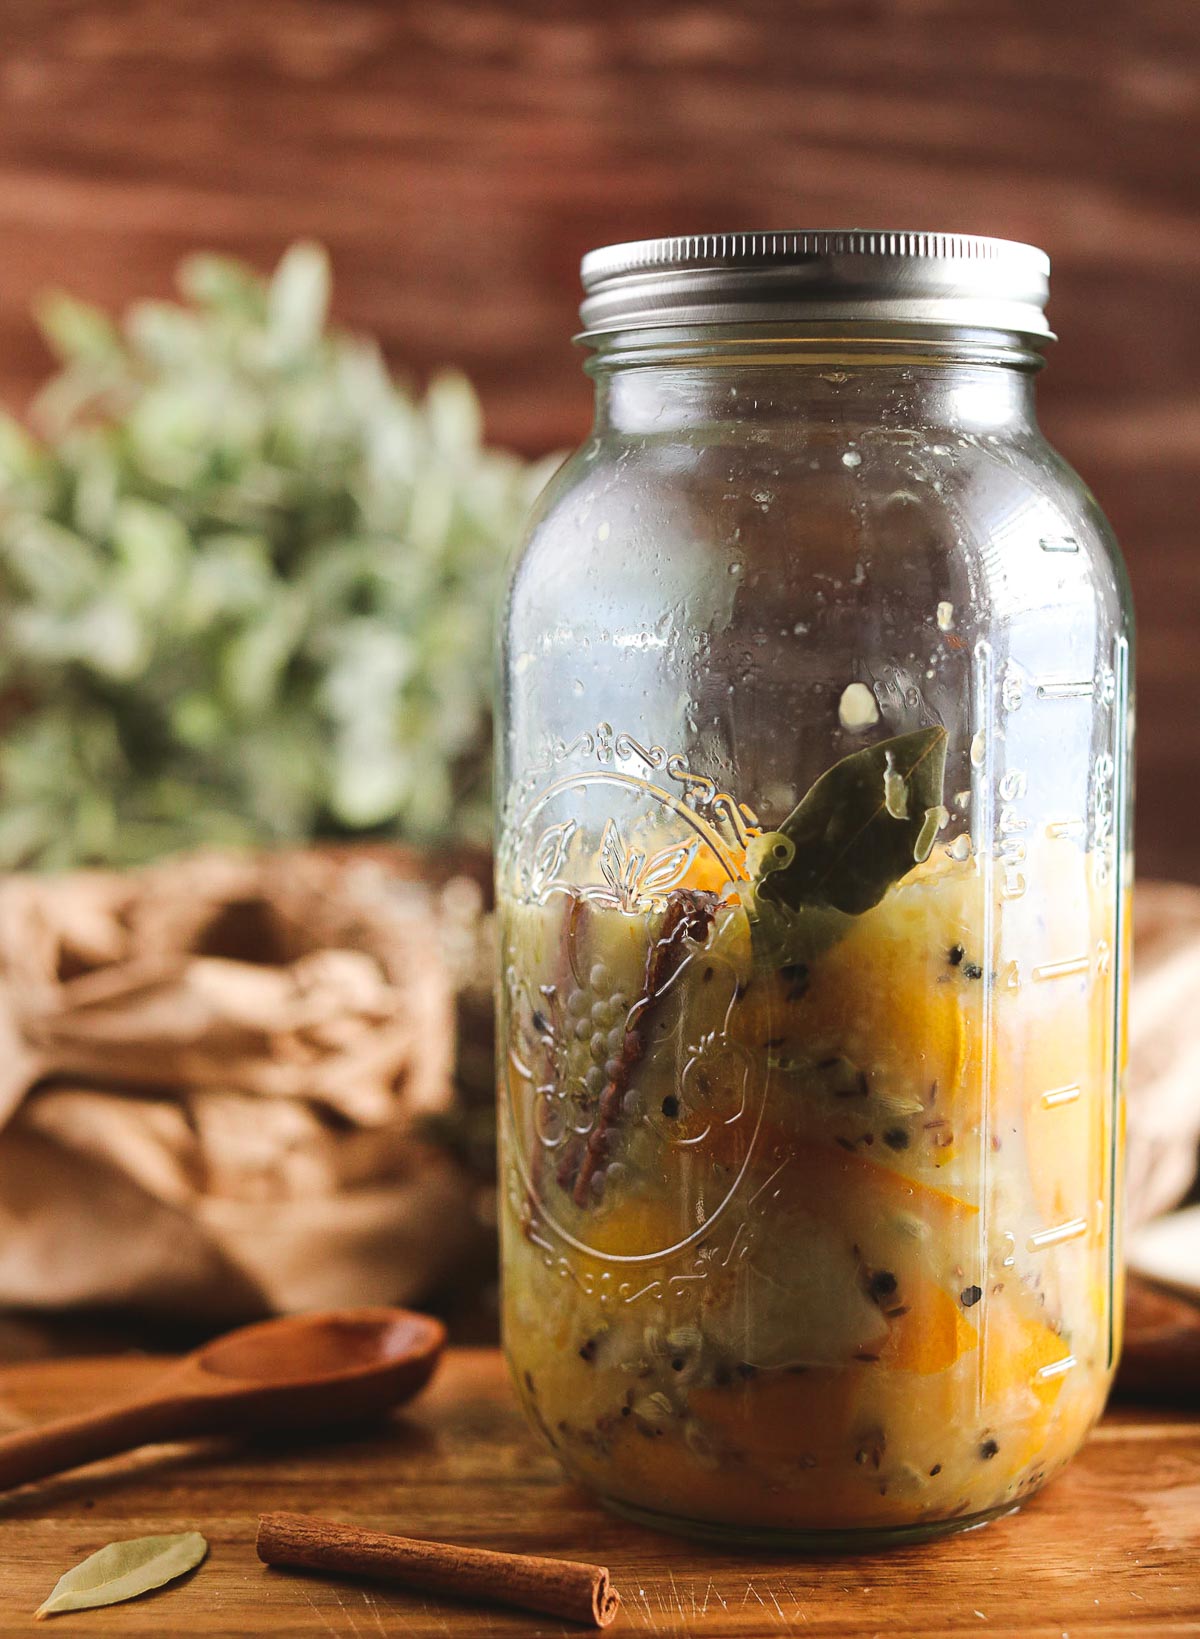 A large glass jar half full of muddled, smushed sliced meyer lemons and other ingredients like herbs and spices. The jar is getting ready to be fermented and preserved. It is on a wooden table and small white flowers can be seen behind.